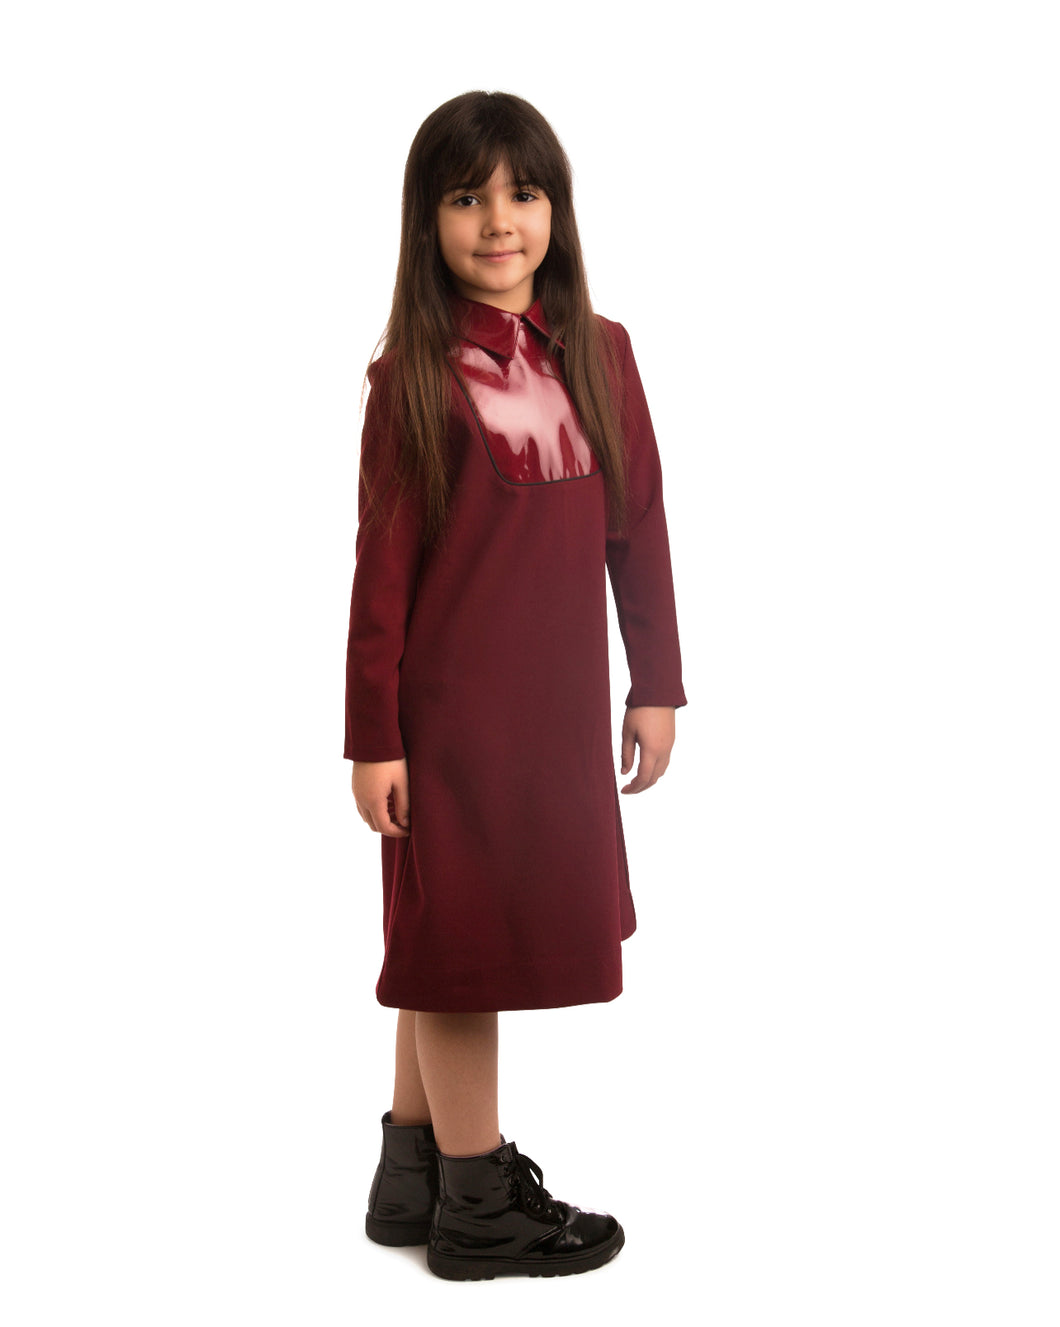 Maroon Collared Dress SNK3230A